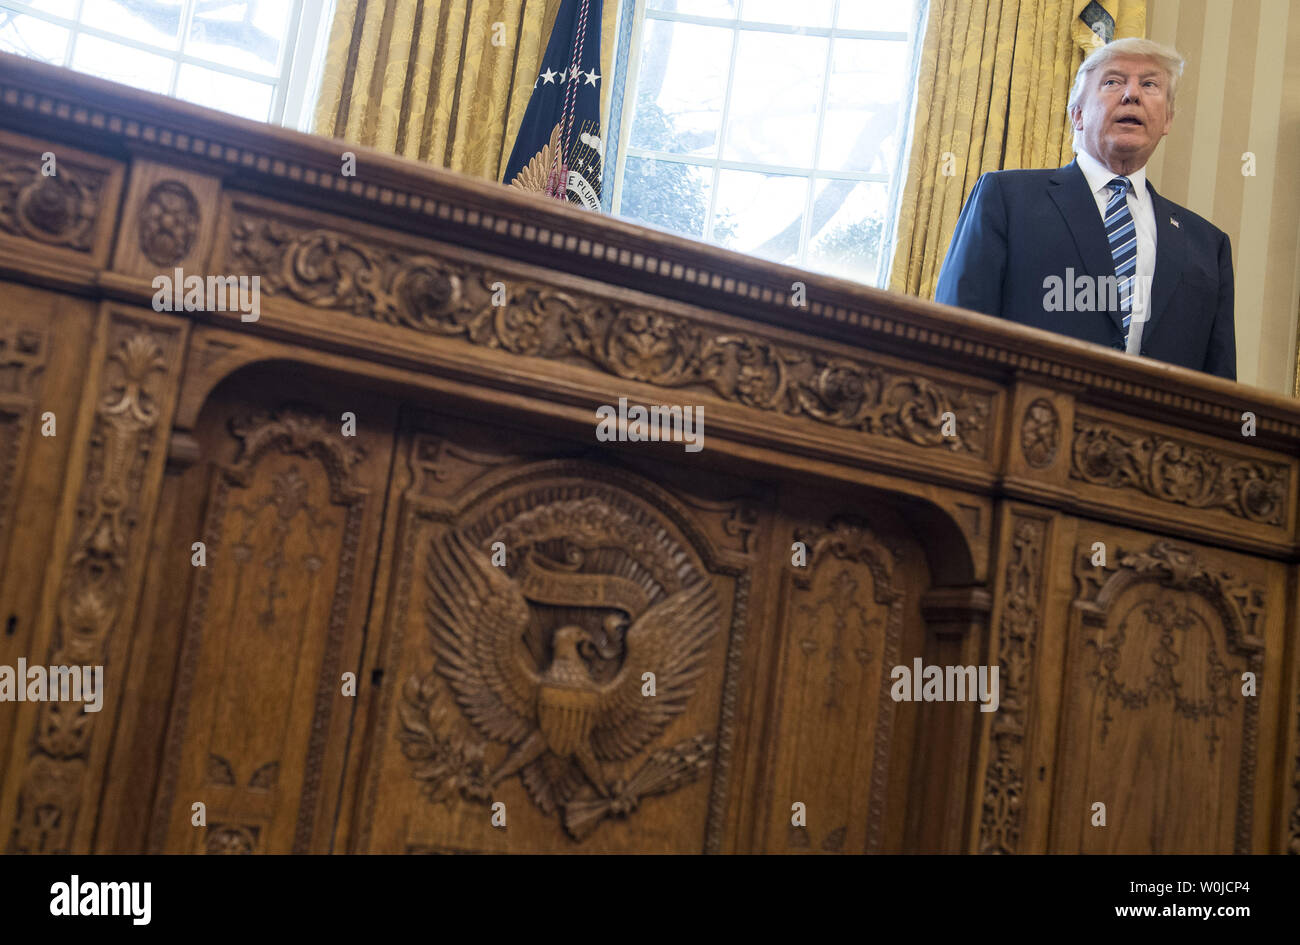 President Donald Trump Is Seen Behind The Resolute Desk In The